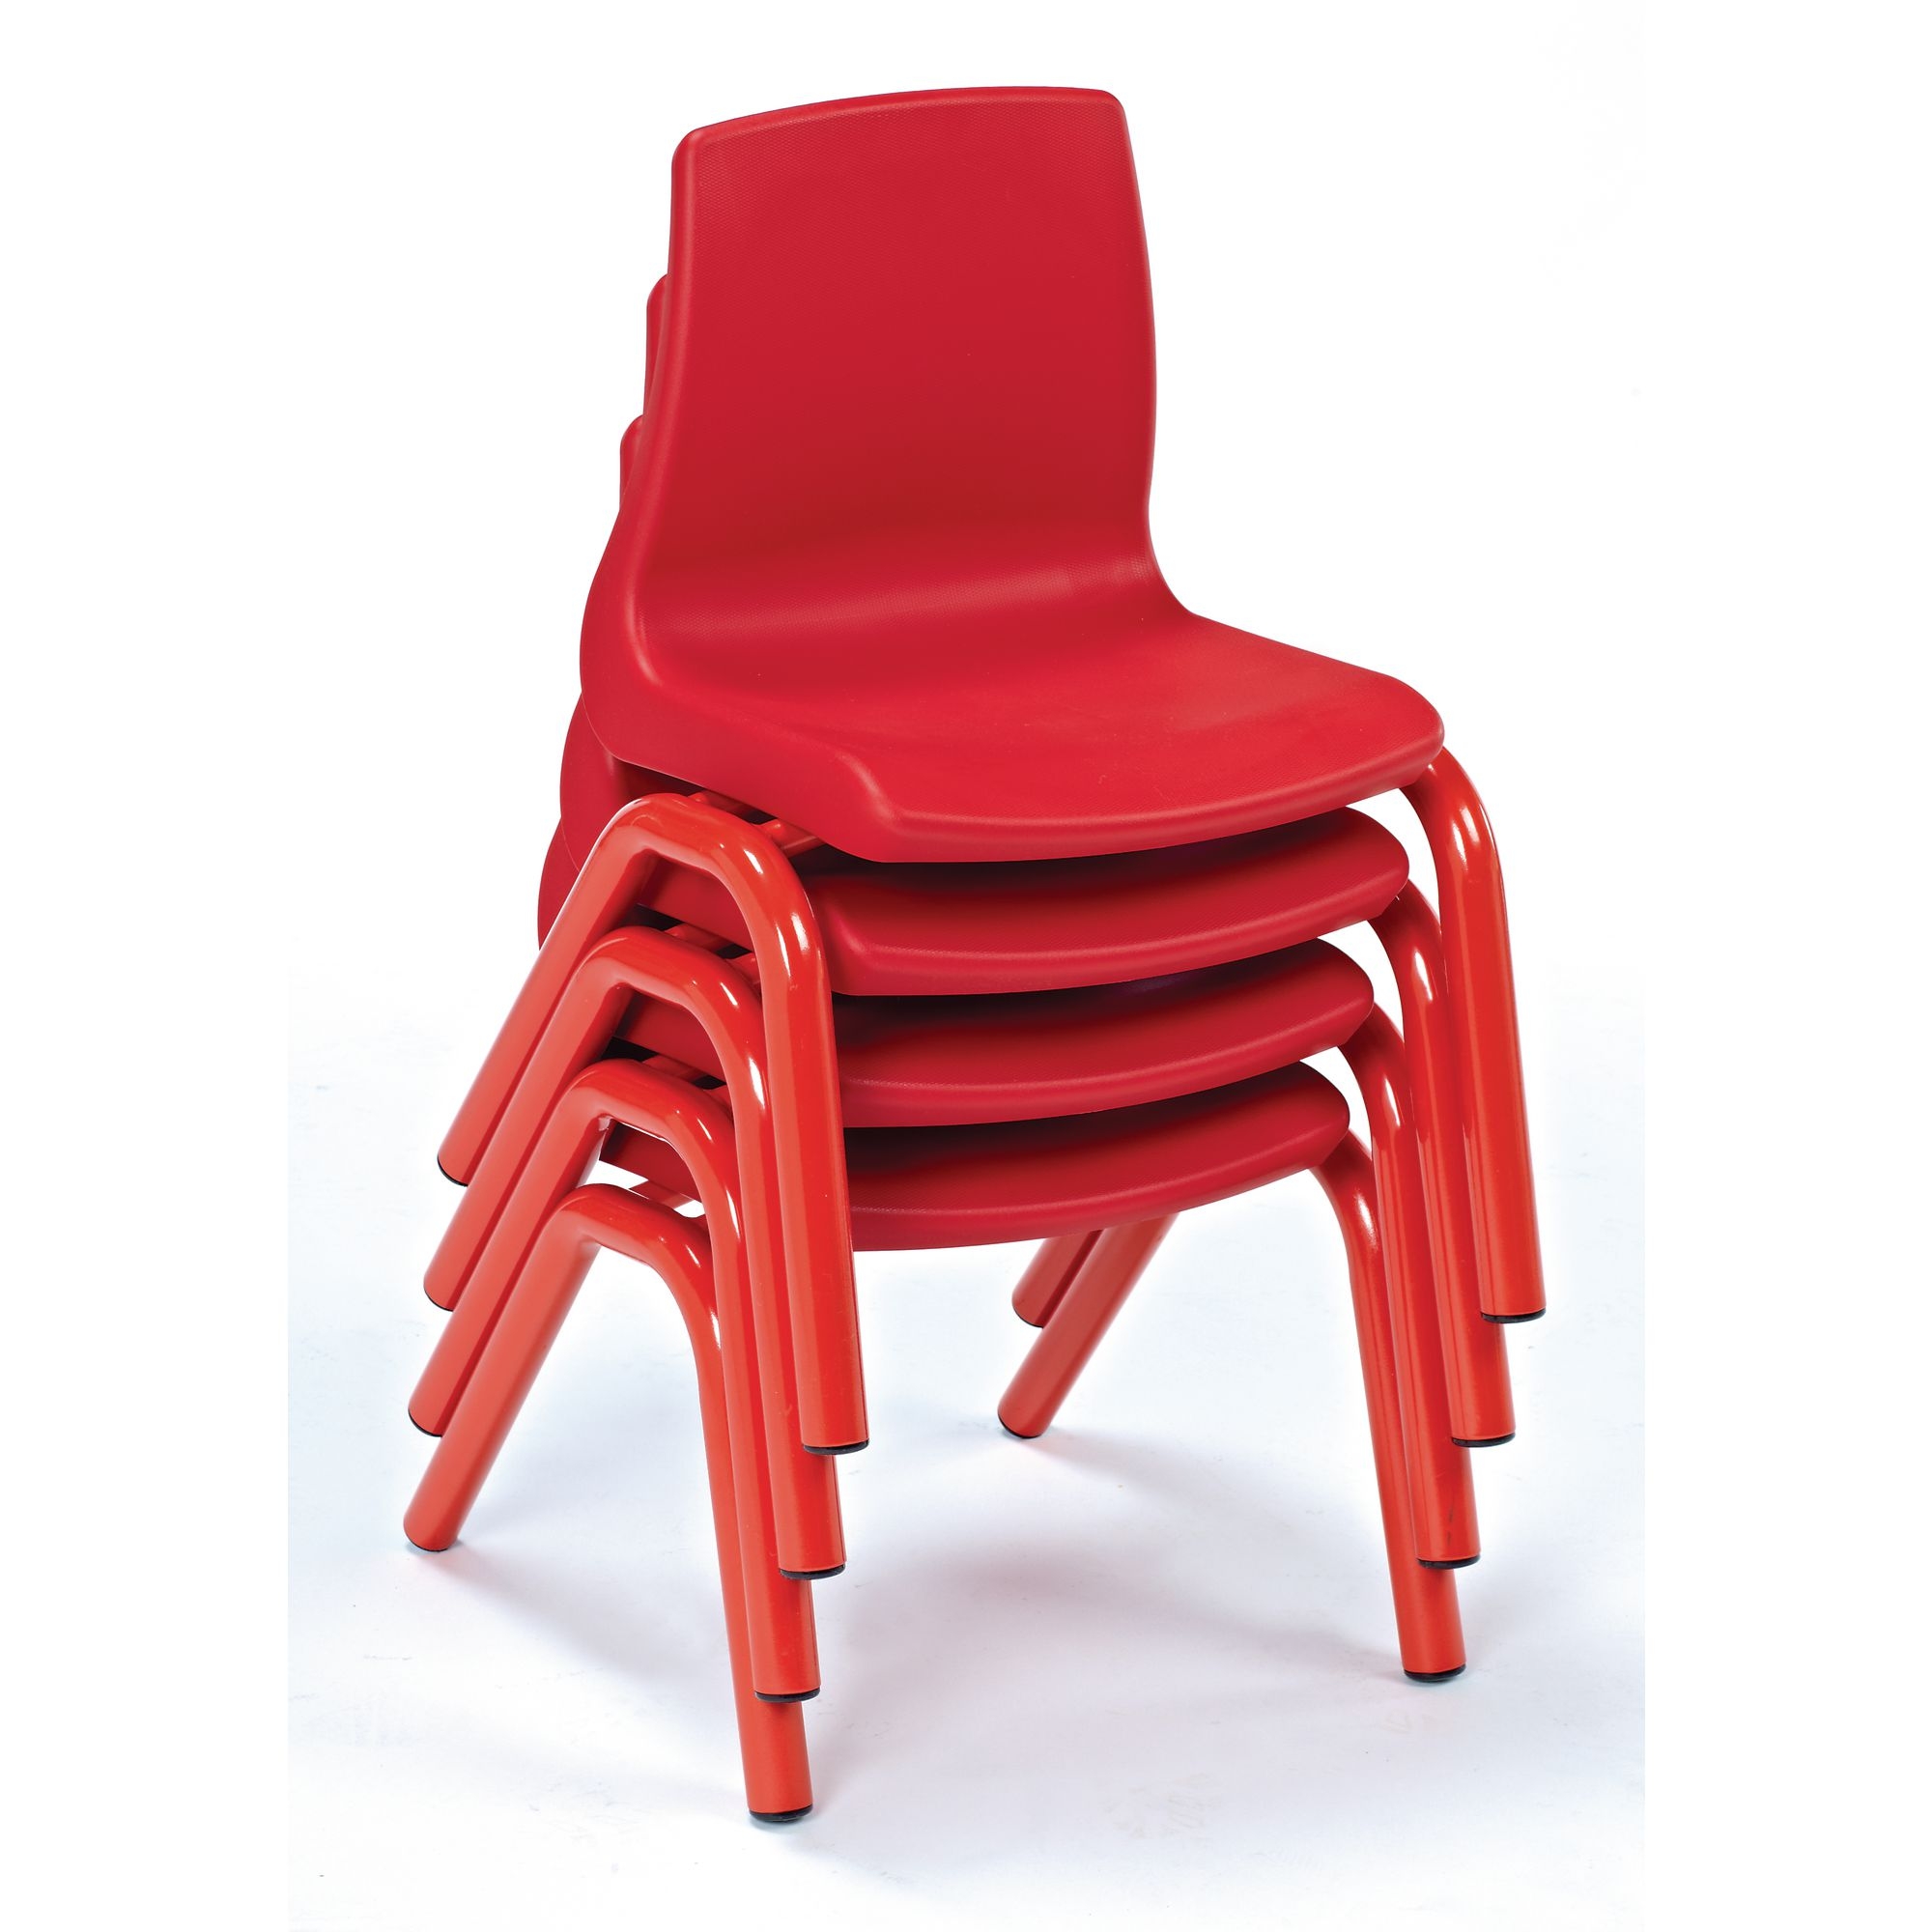 Harlequin Chairs - Size C - Seat height: 350mm - Red